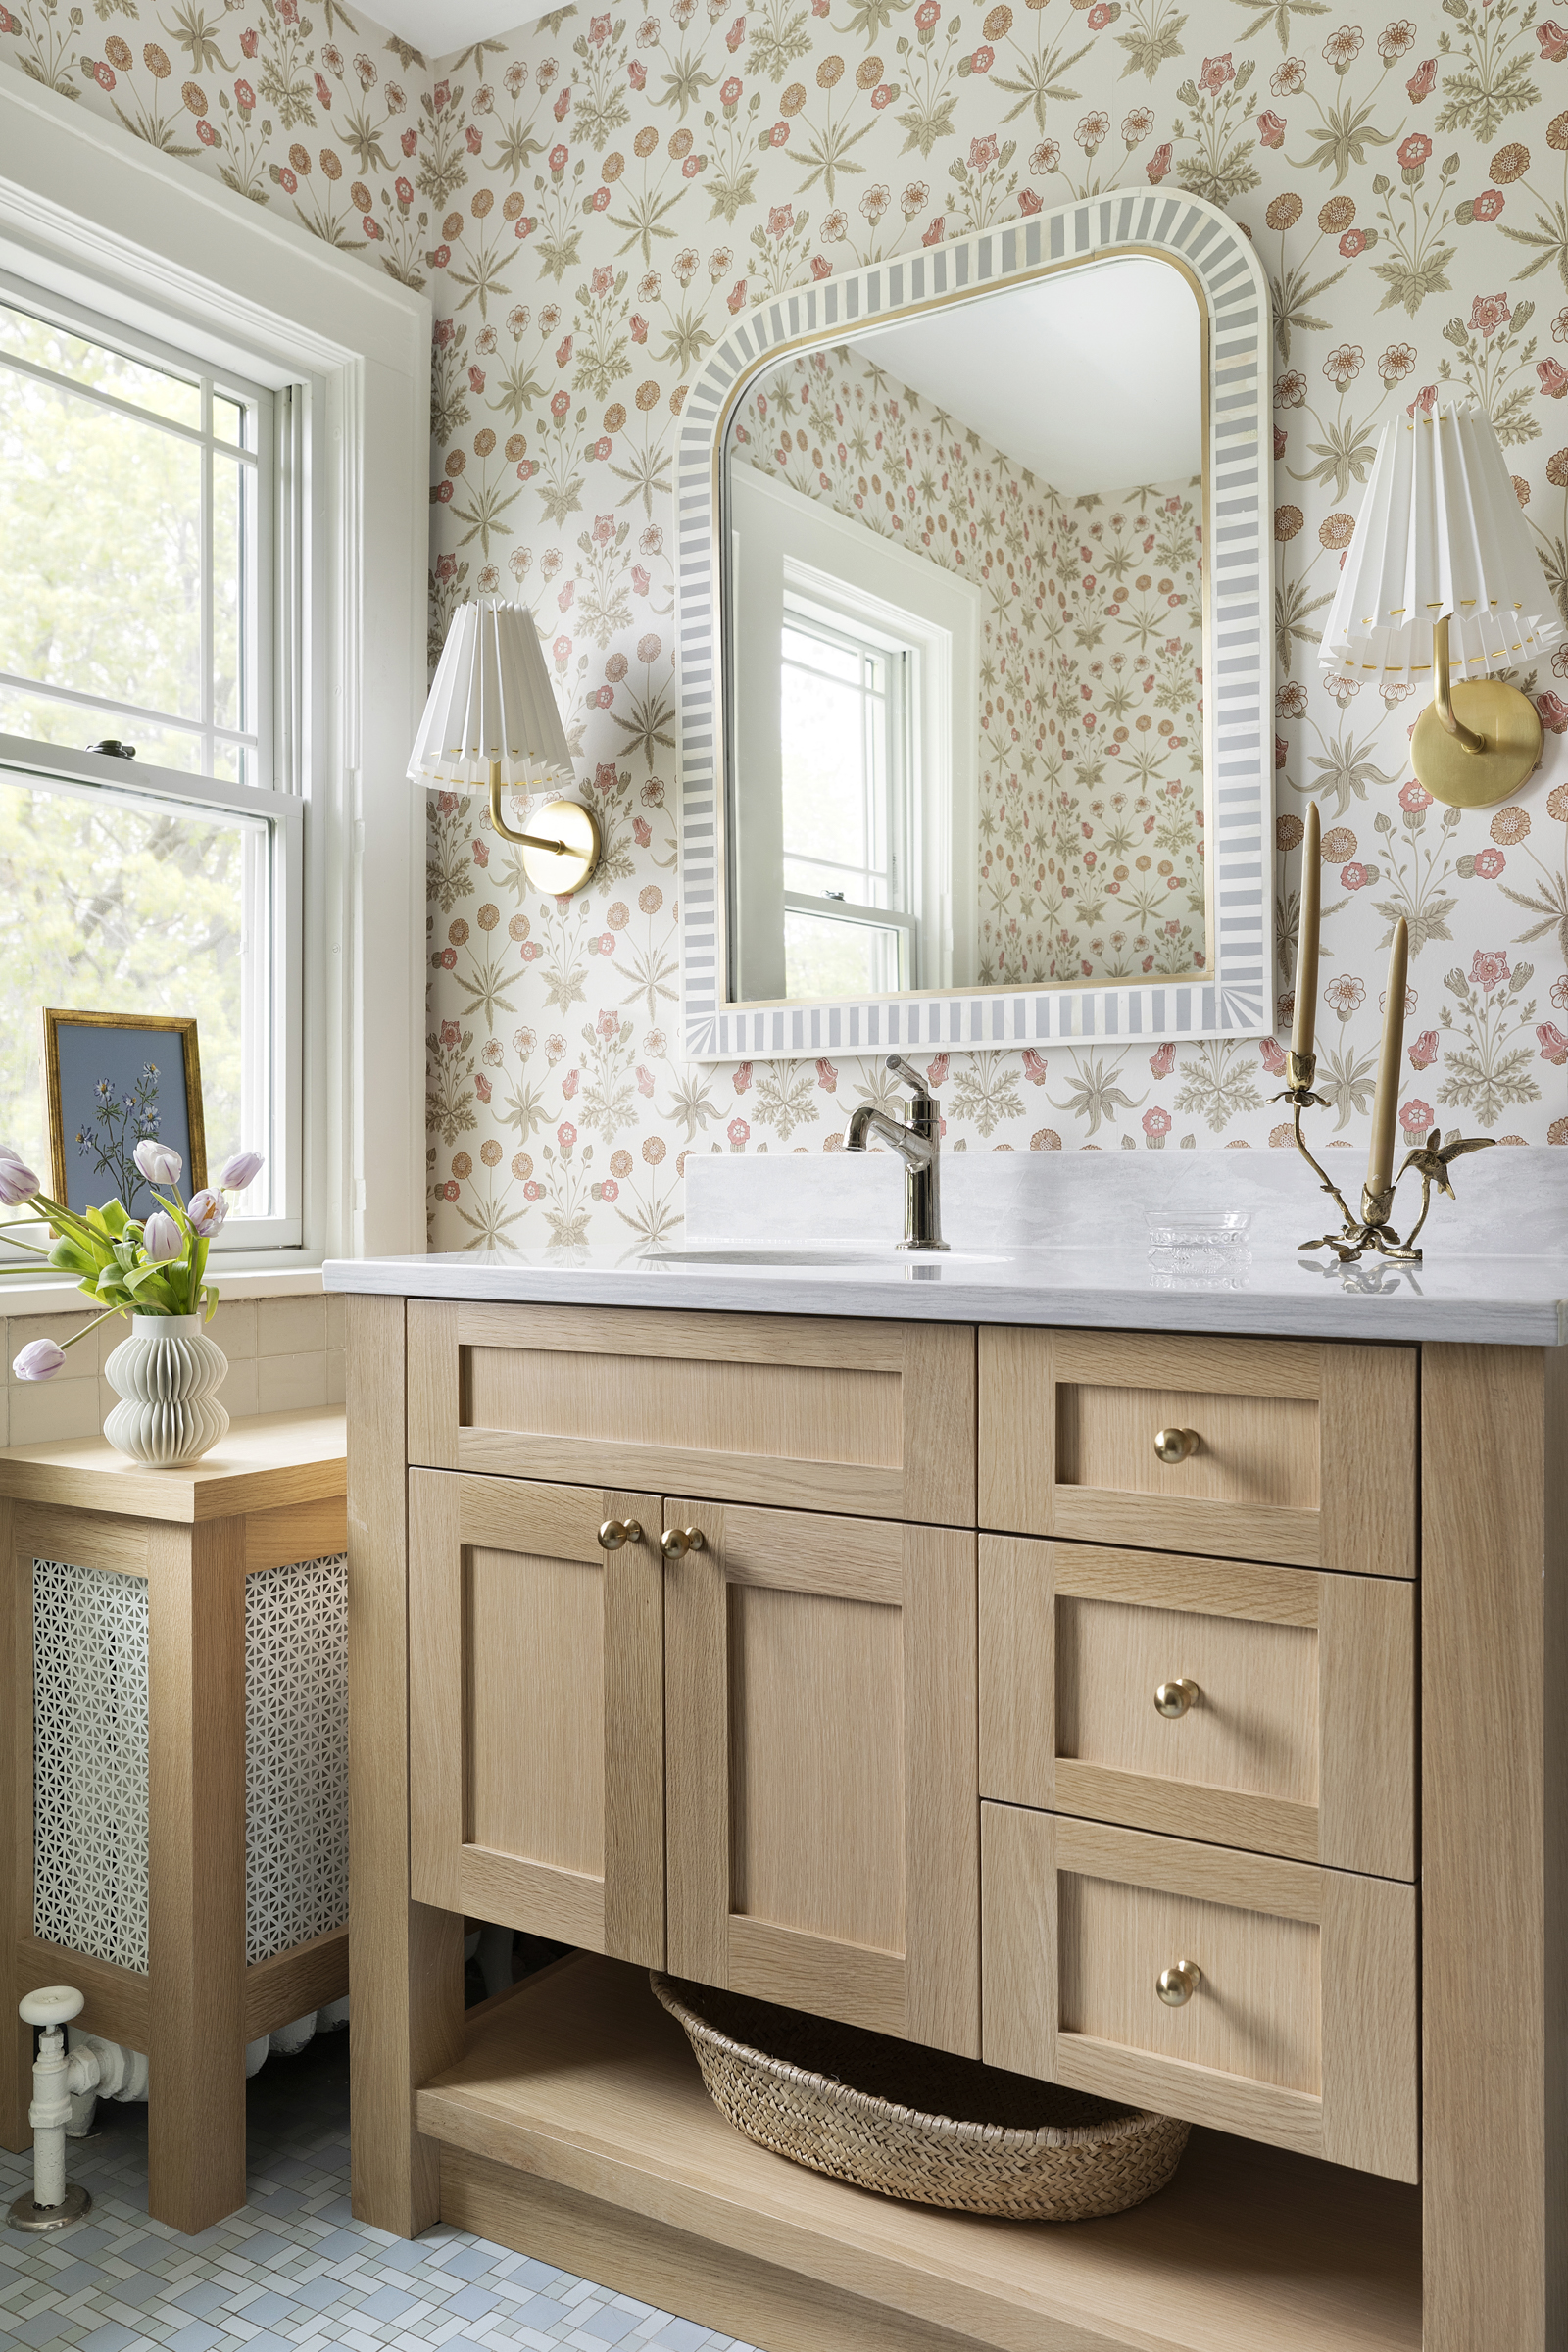 Twin Cities bathroom renovation with white oak vanity and floral wallpaper.